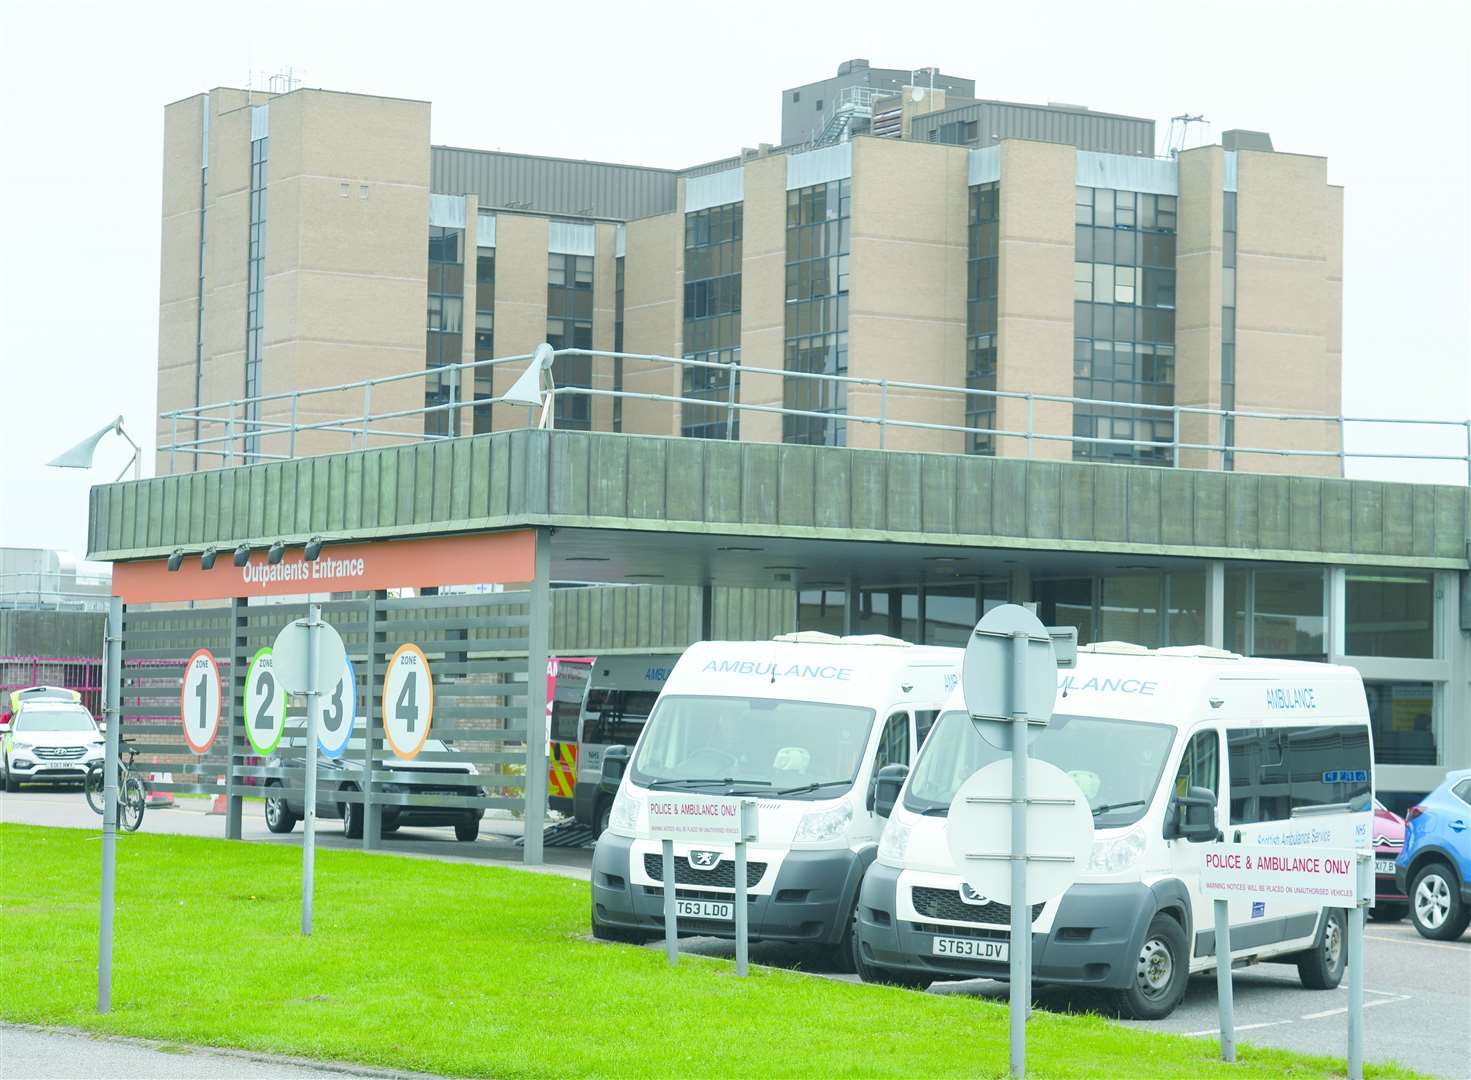 Raigmore Hospital was praised across a number of areas for its efforts – but inspectors want to ensure the fabric of the building is maintained to assist cleaning.